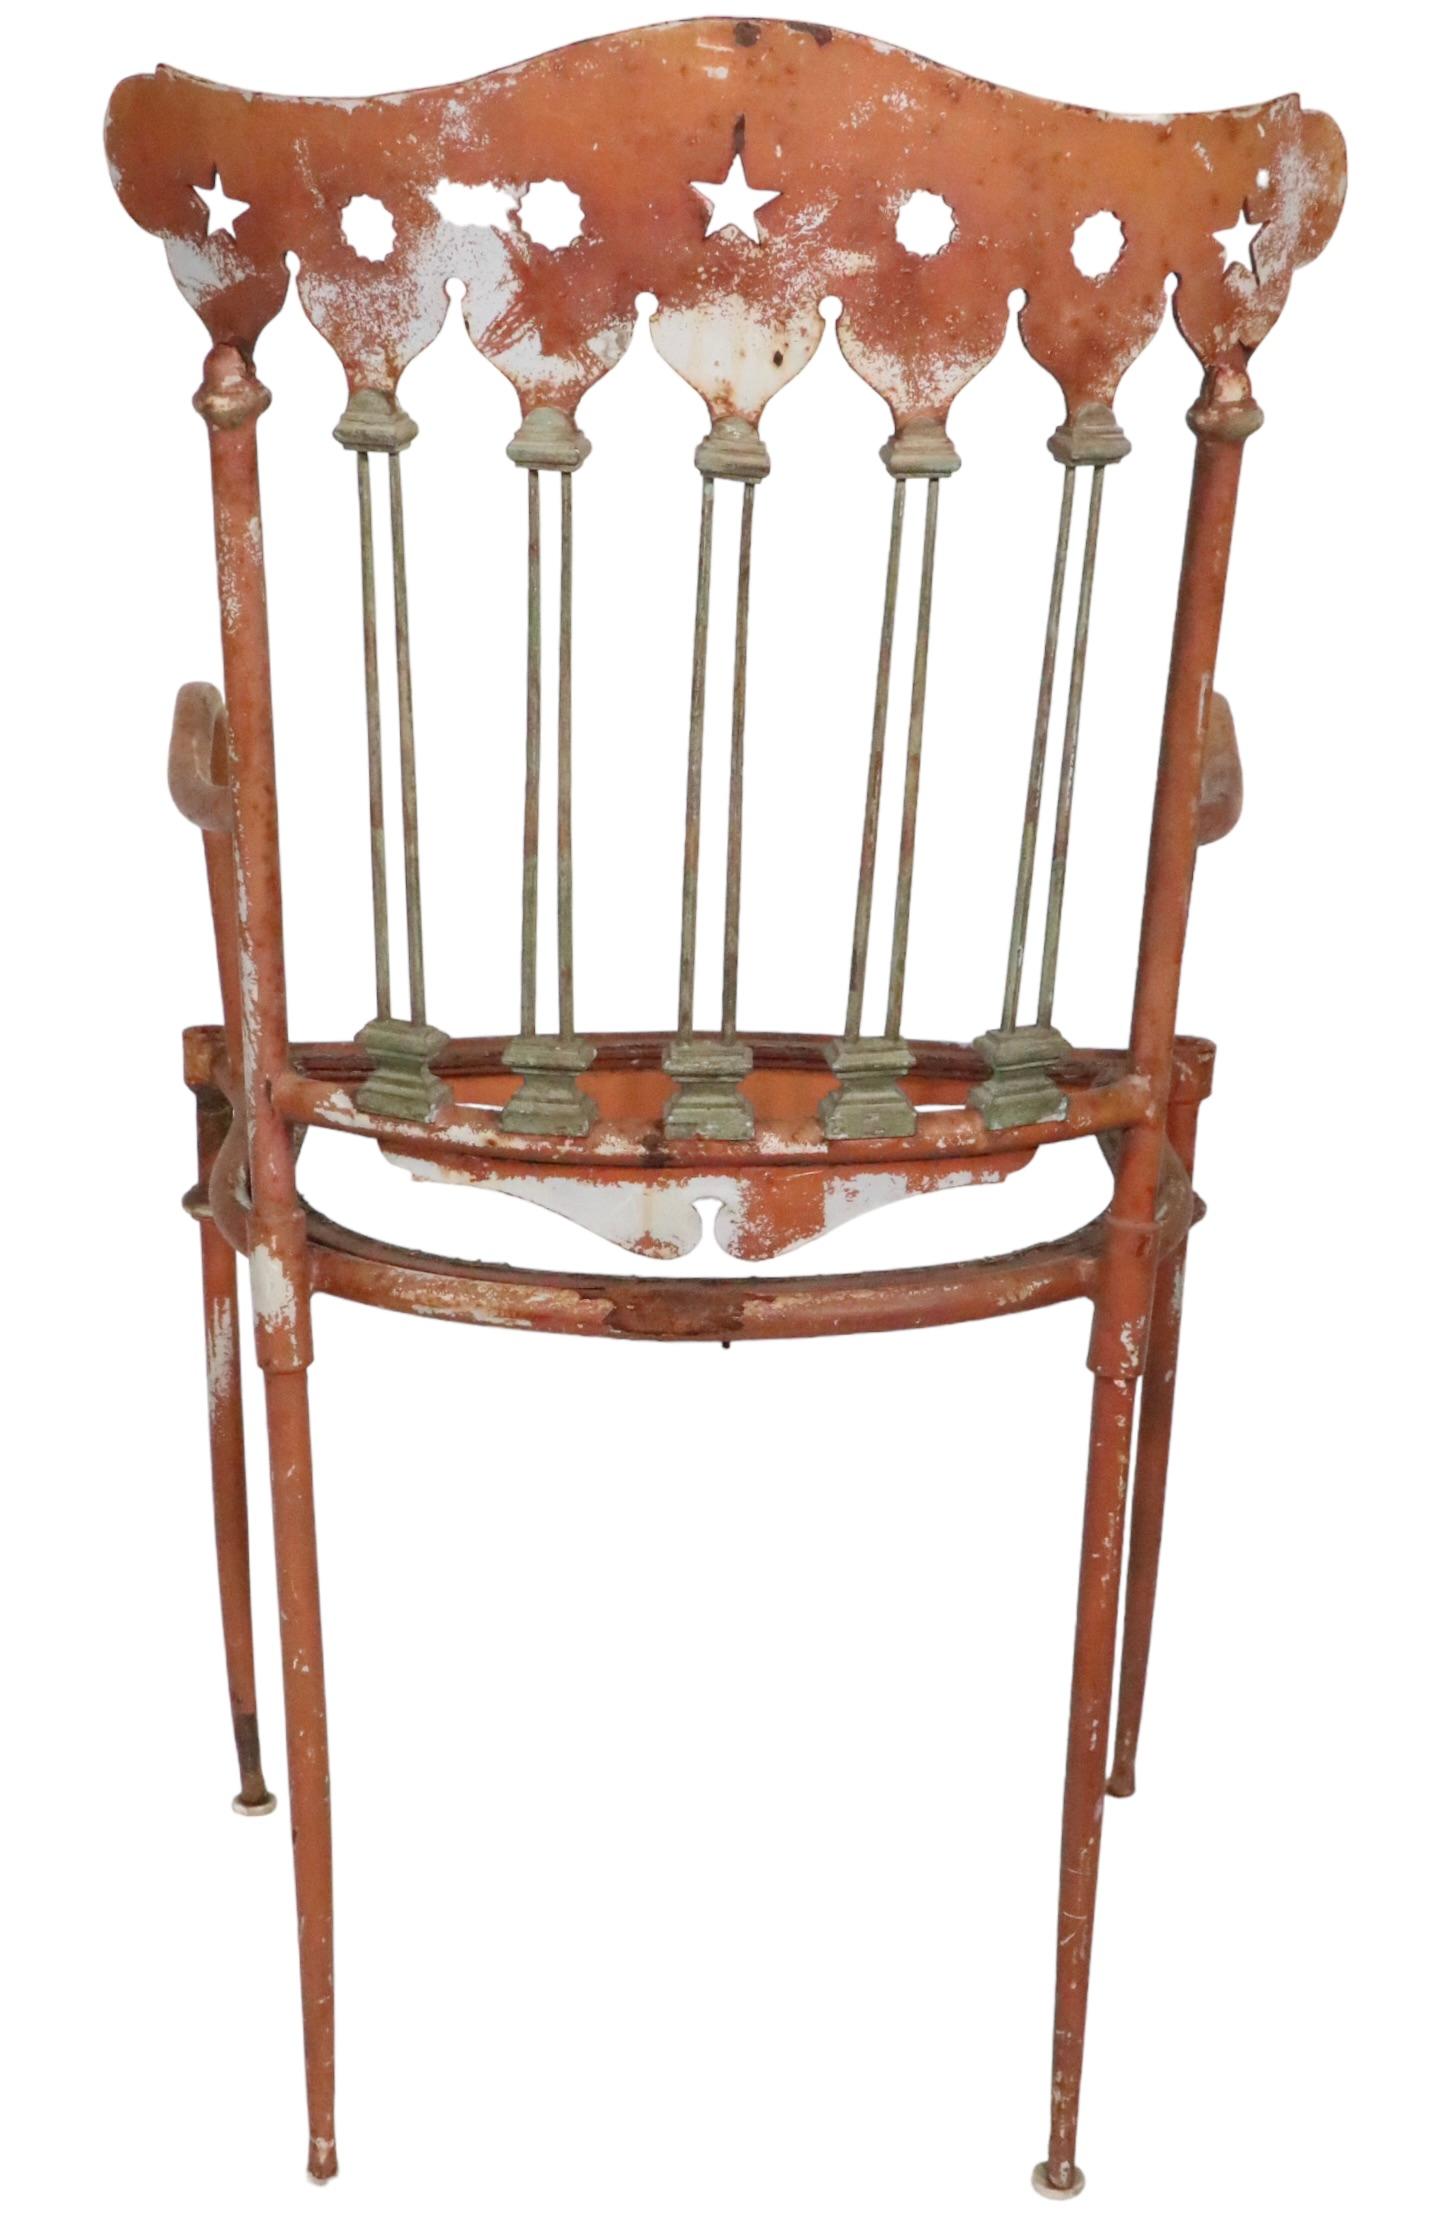   Decorative Antique Iron Brass and Steel Garden Patio Chair c 1900/1930's For Sale 9